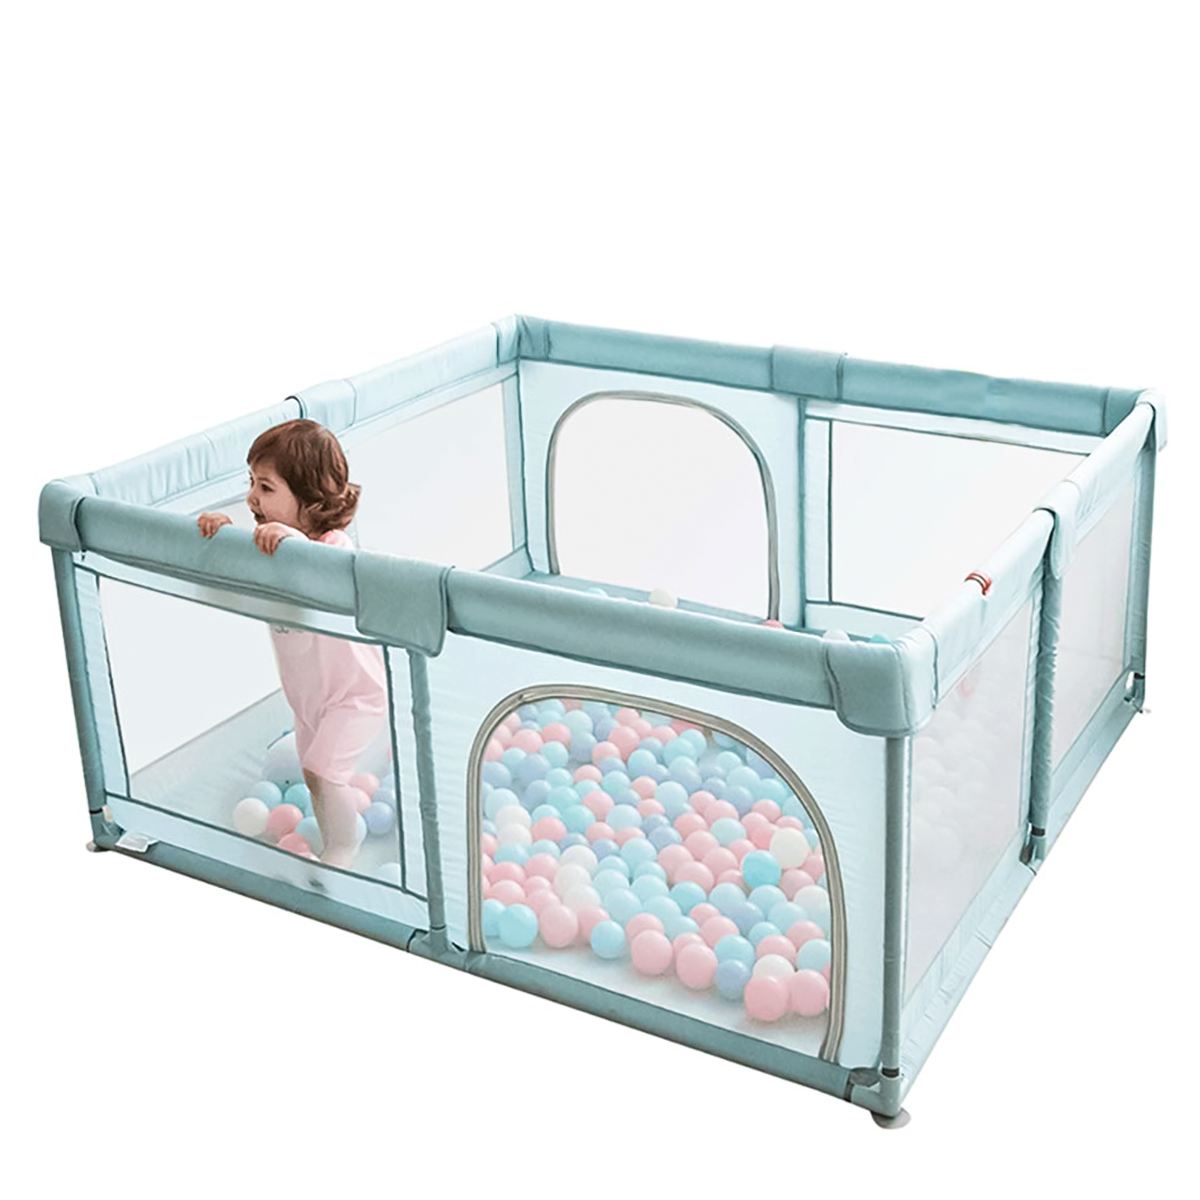 Baby-Playpen-Interactive-Safety-Indoor-Gate-Play-Yards-Tent-Court-Foldable-Portable-Kids-Furniture-f-1878434-10